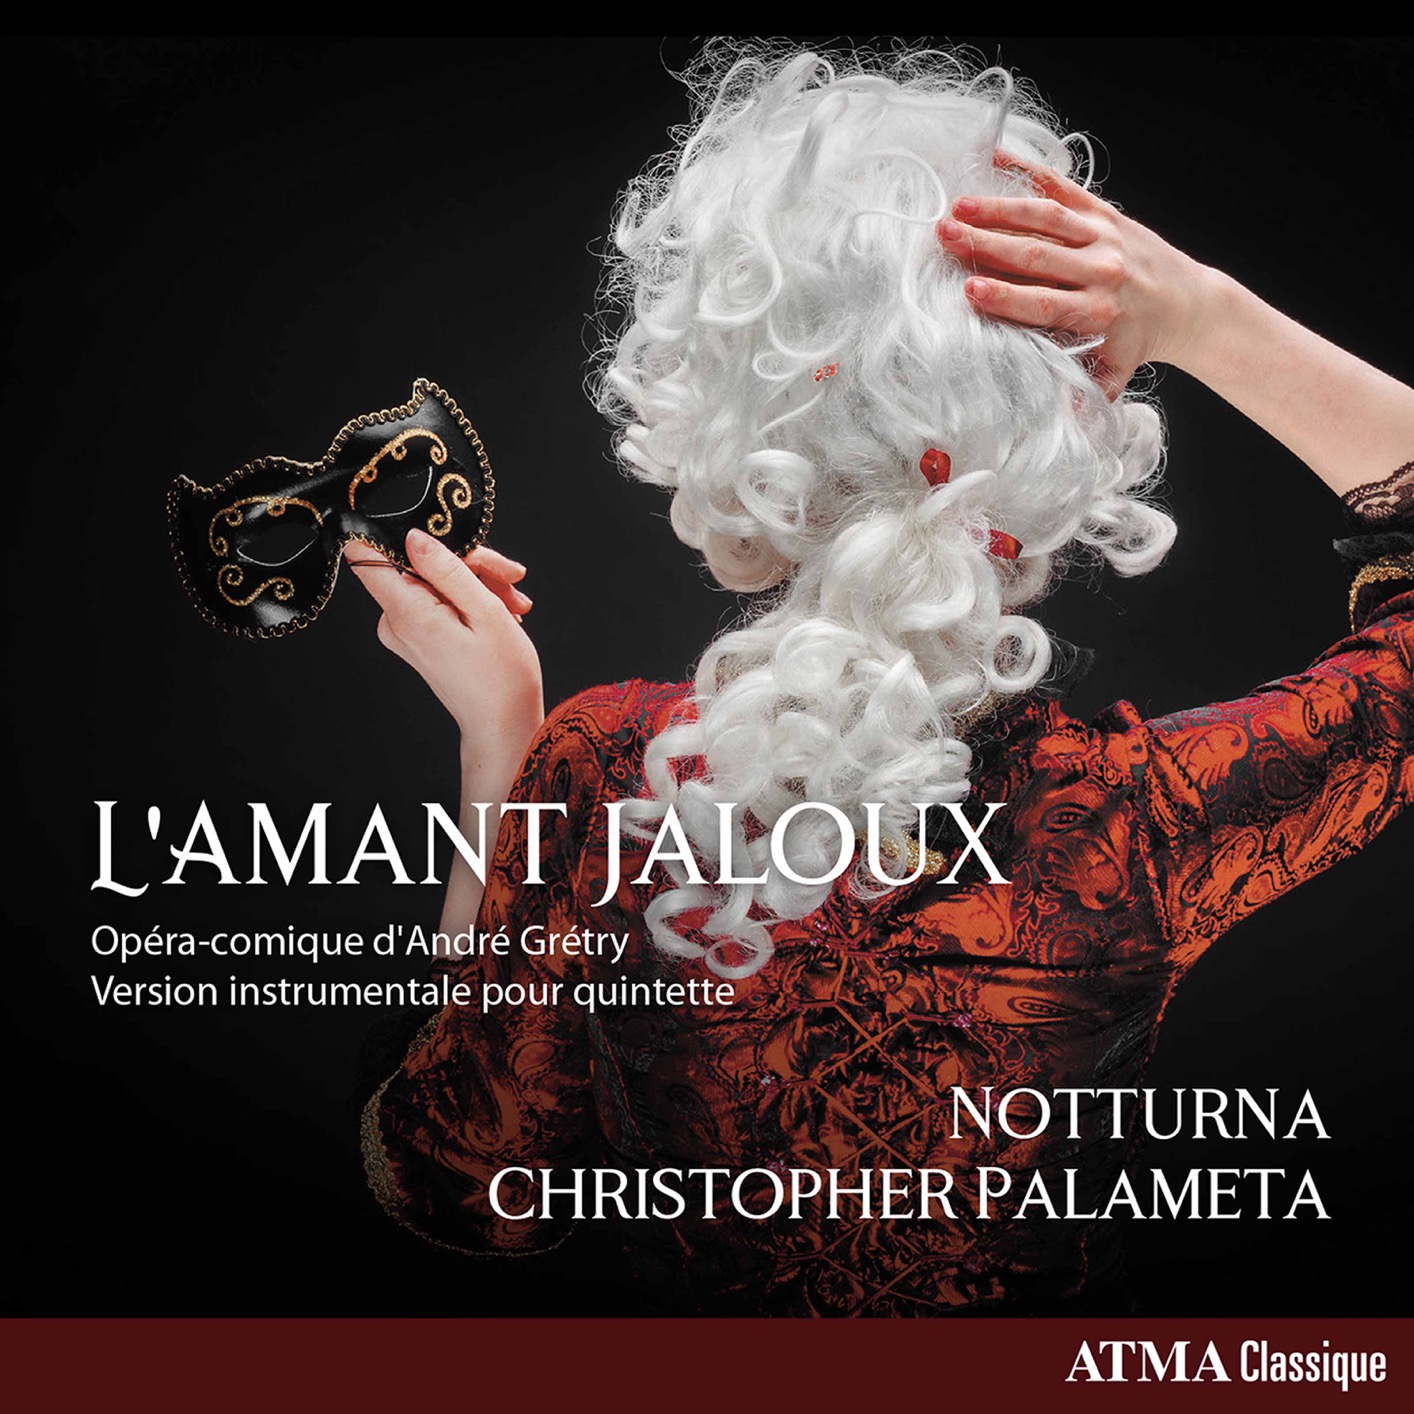 Notturna - Gretry - L’amant jaloux (Arr. for Mixed Chamber Ensemble) (2020) [FLAC 24bit/96kHz]